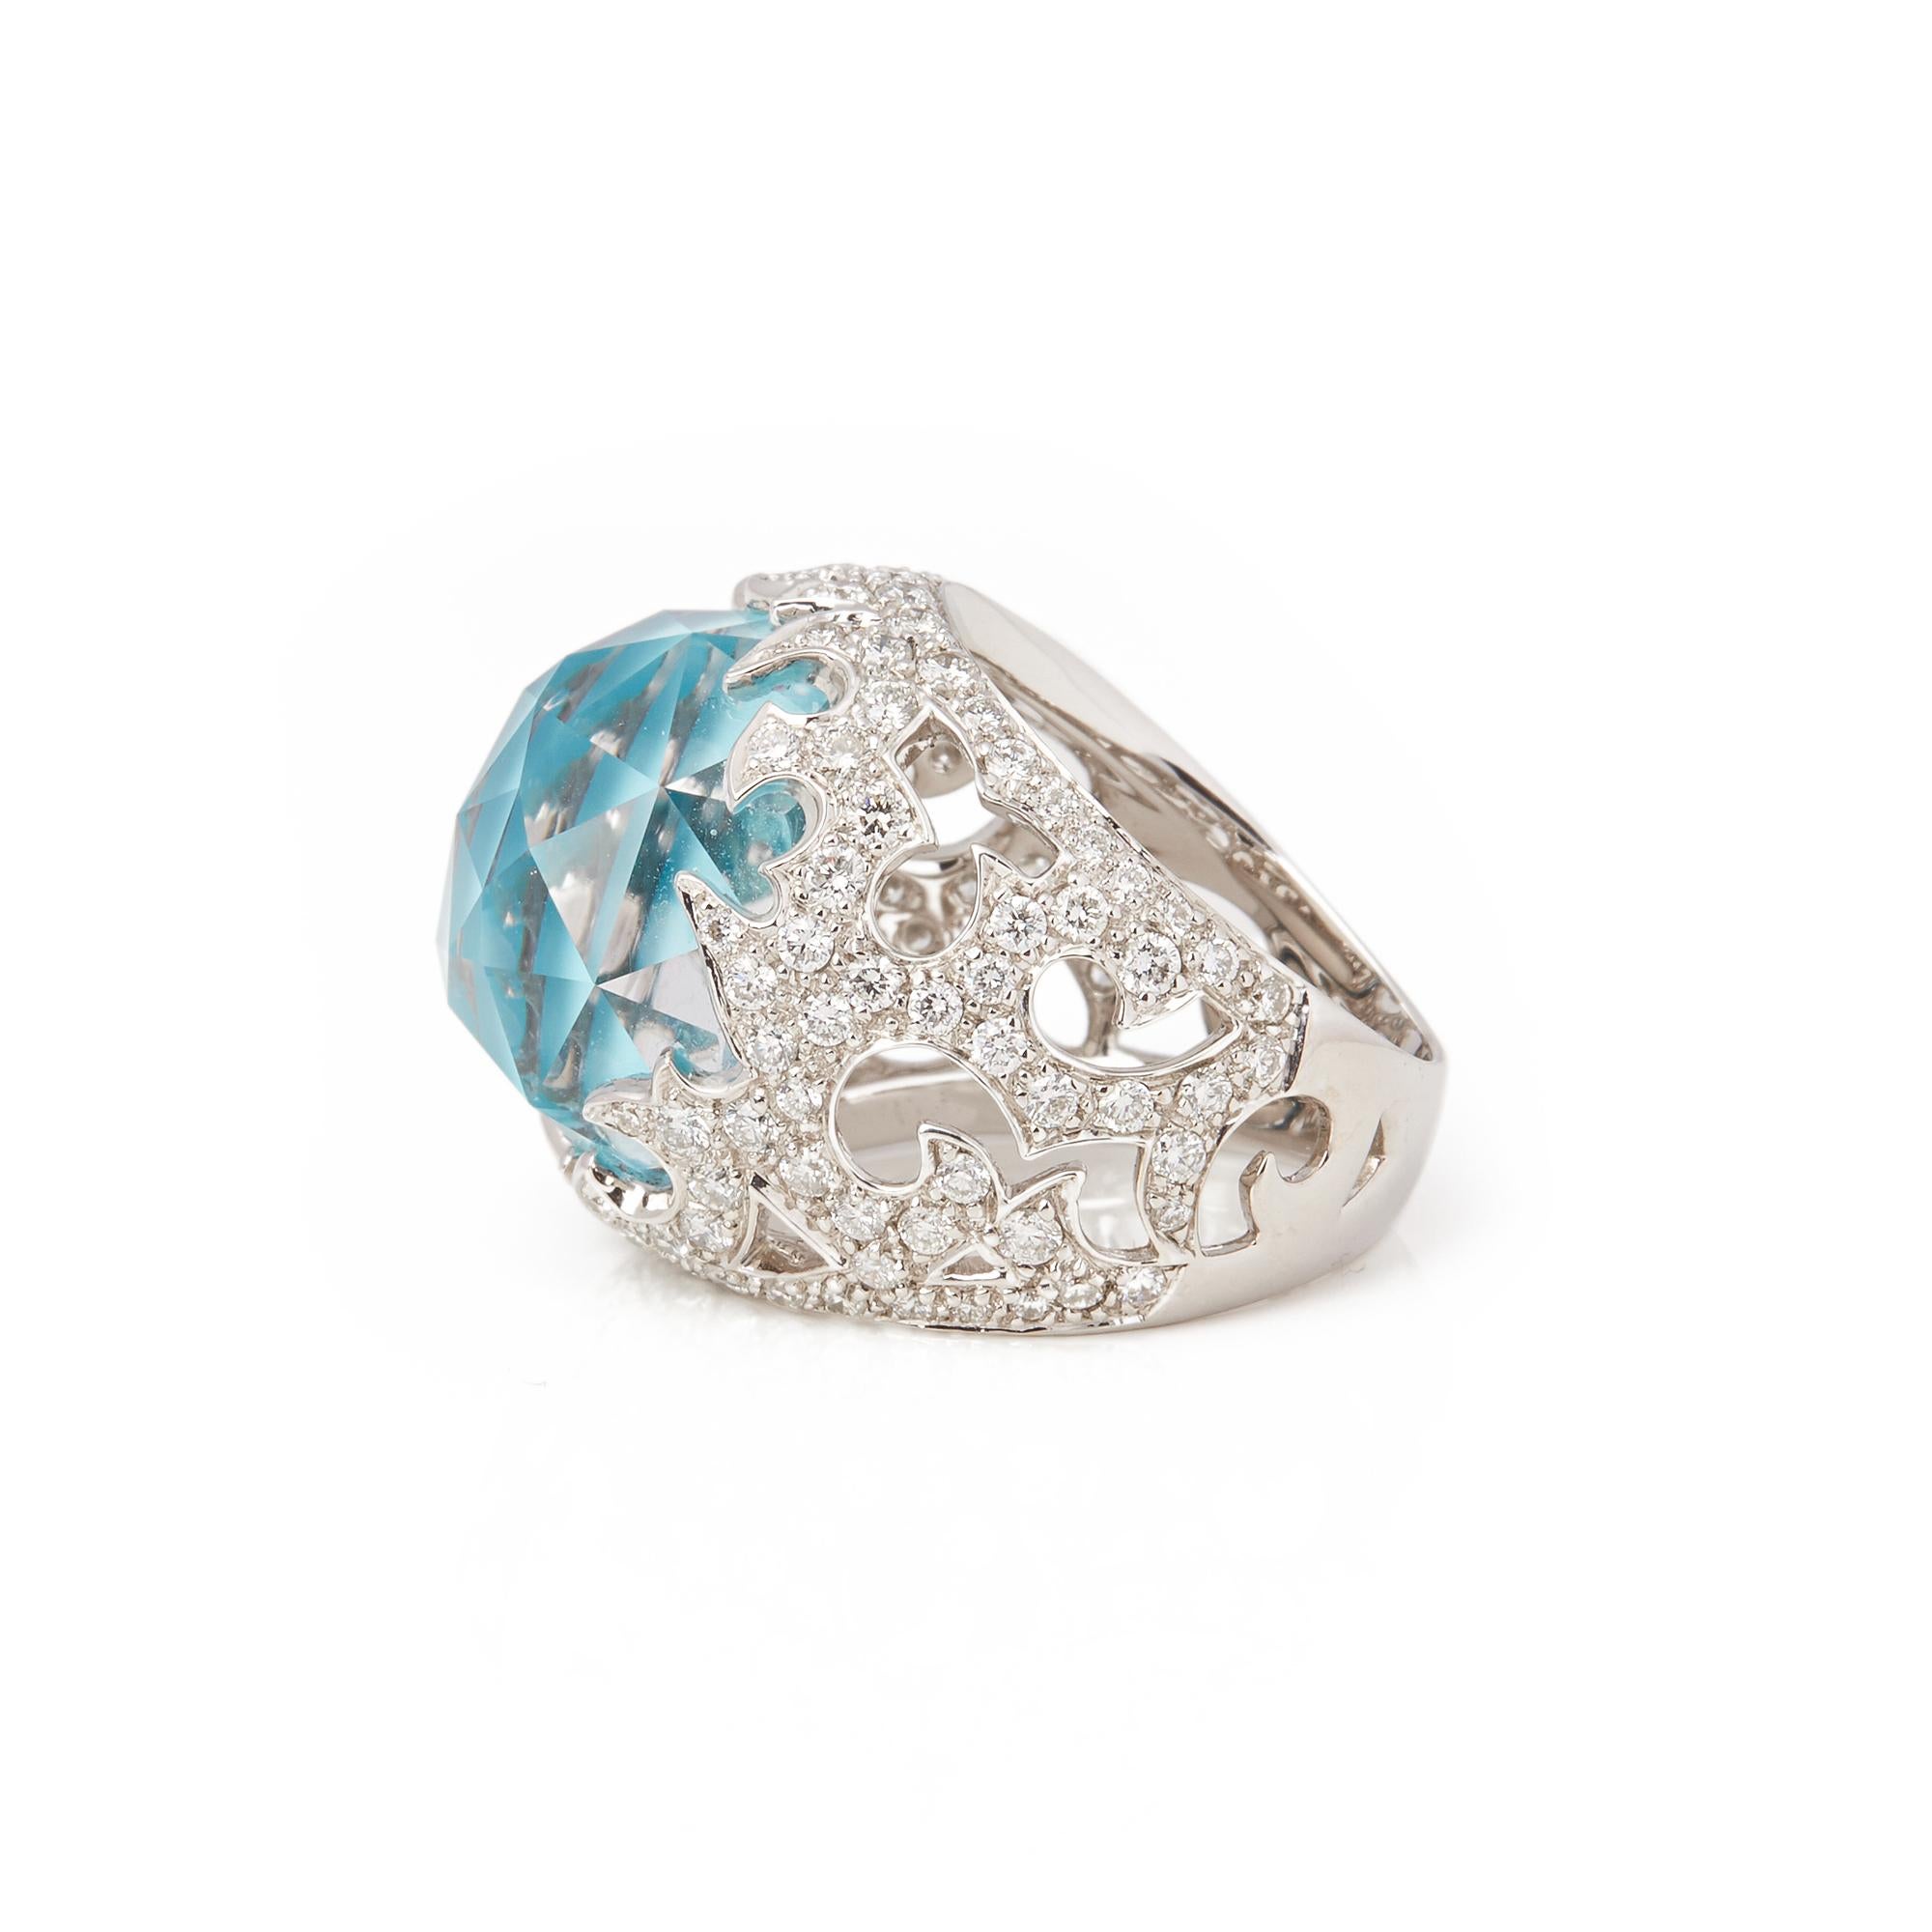 This ring by Stephen Webster is from his Borneo Lipstick collection and features a turquoise and quartz Crystal Haze stone surrounded by pave set white diamonds. Set in white gold with signature band. Ring Size N 1/2. Complete with Xupes